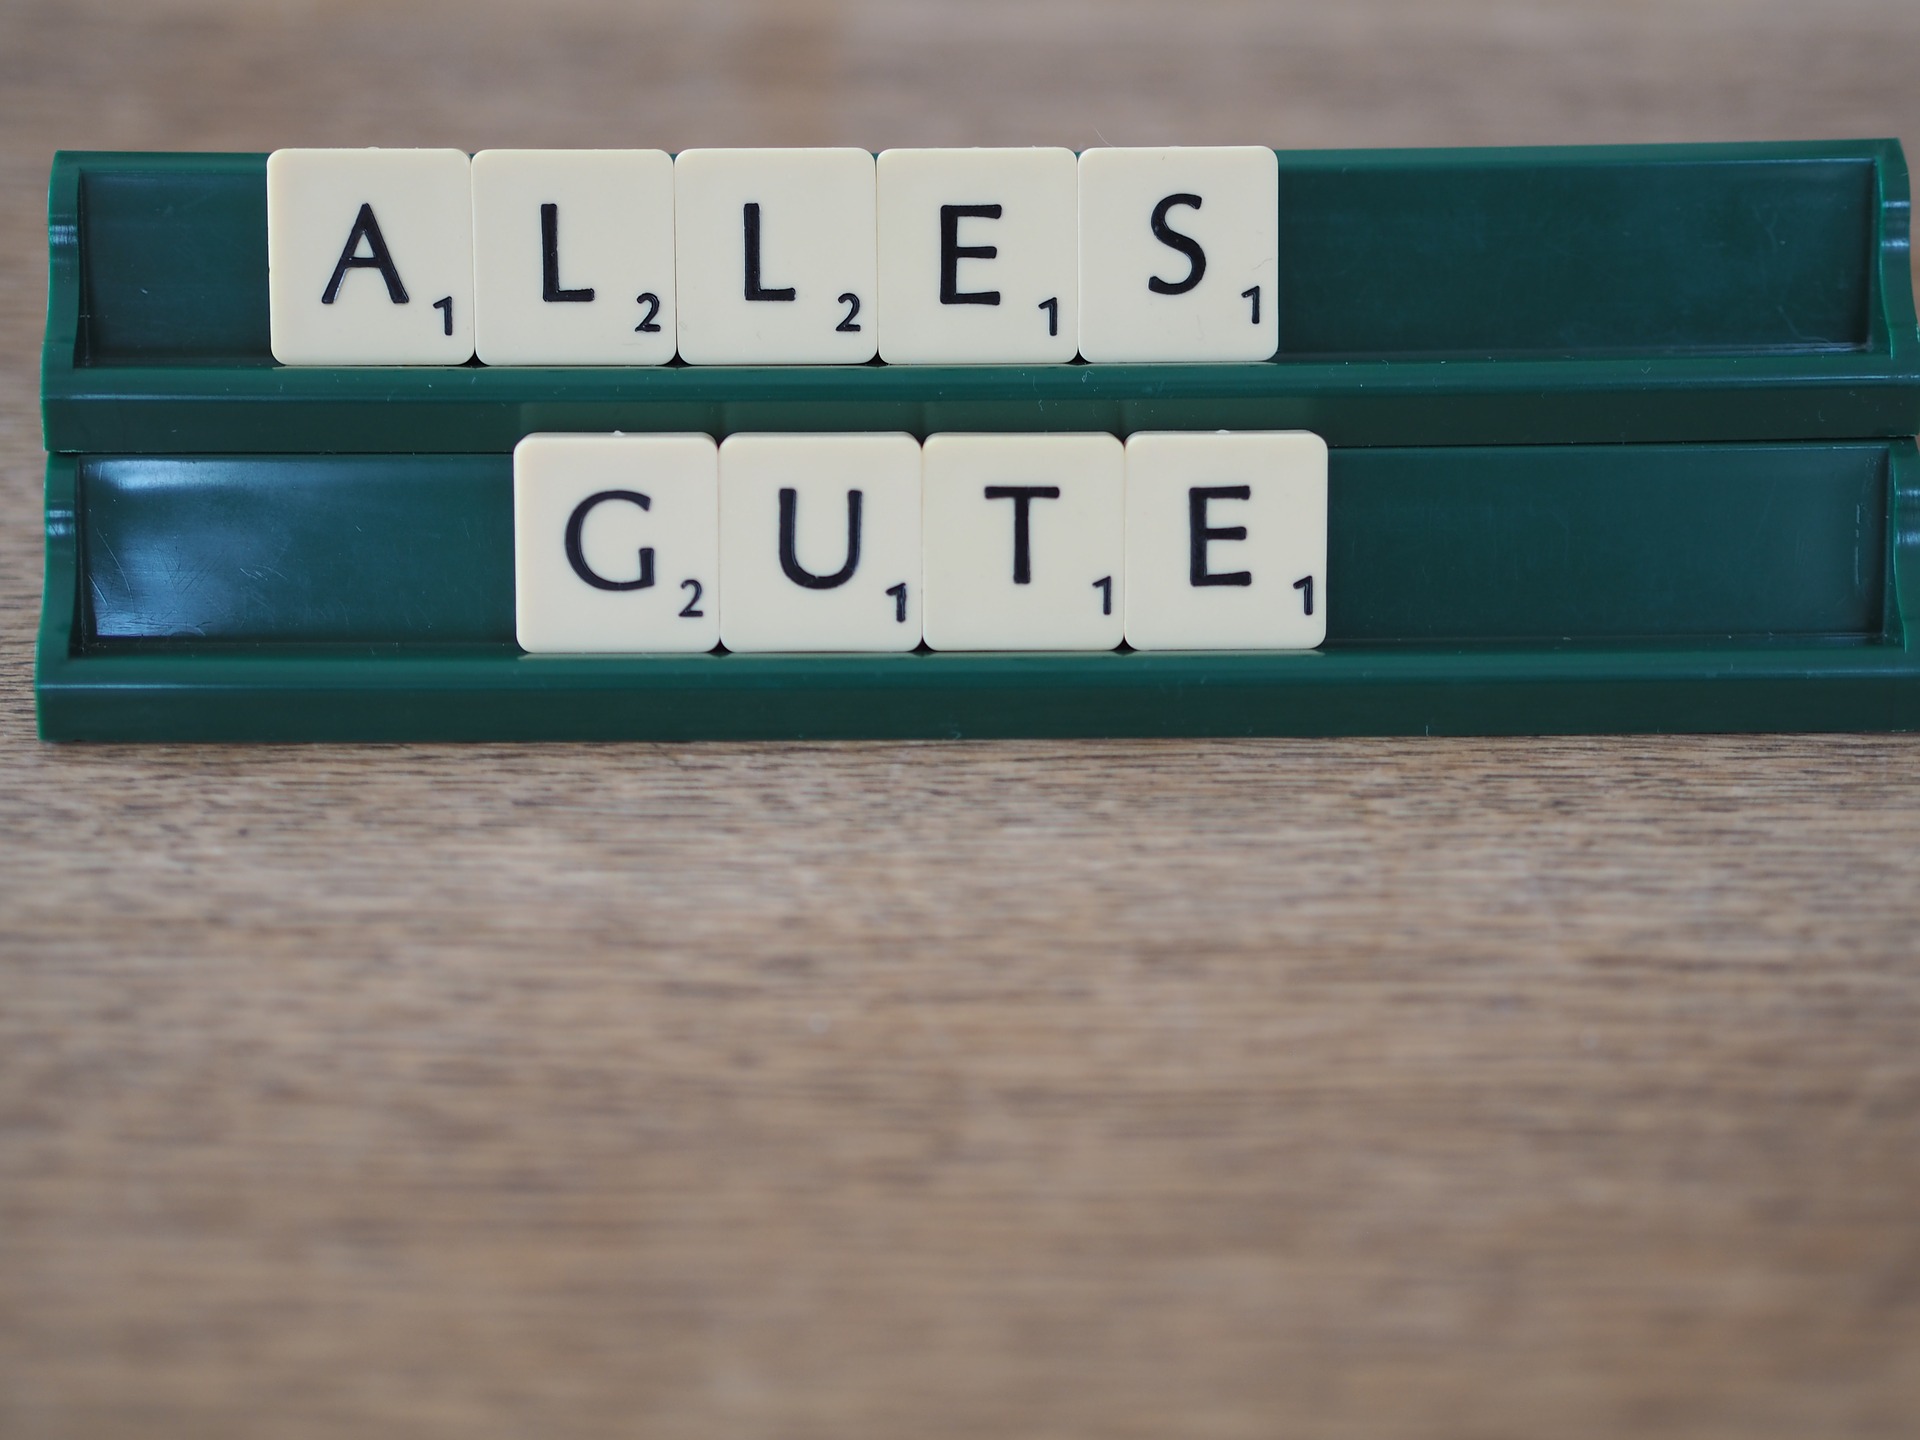 Alles Gute spelled with scrabble letters